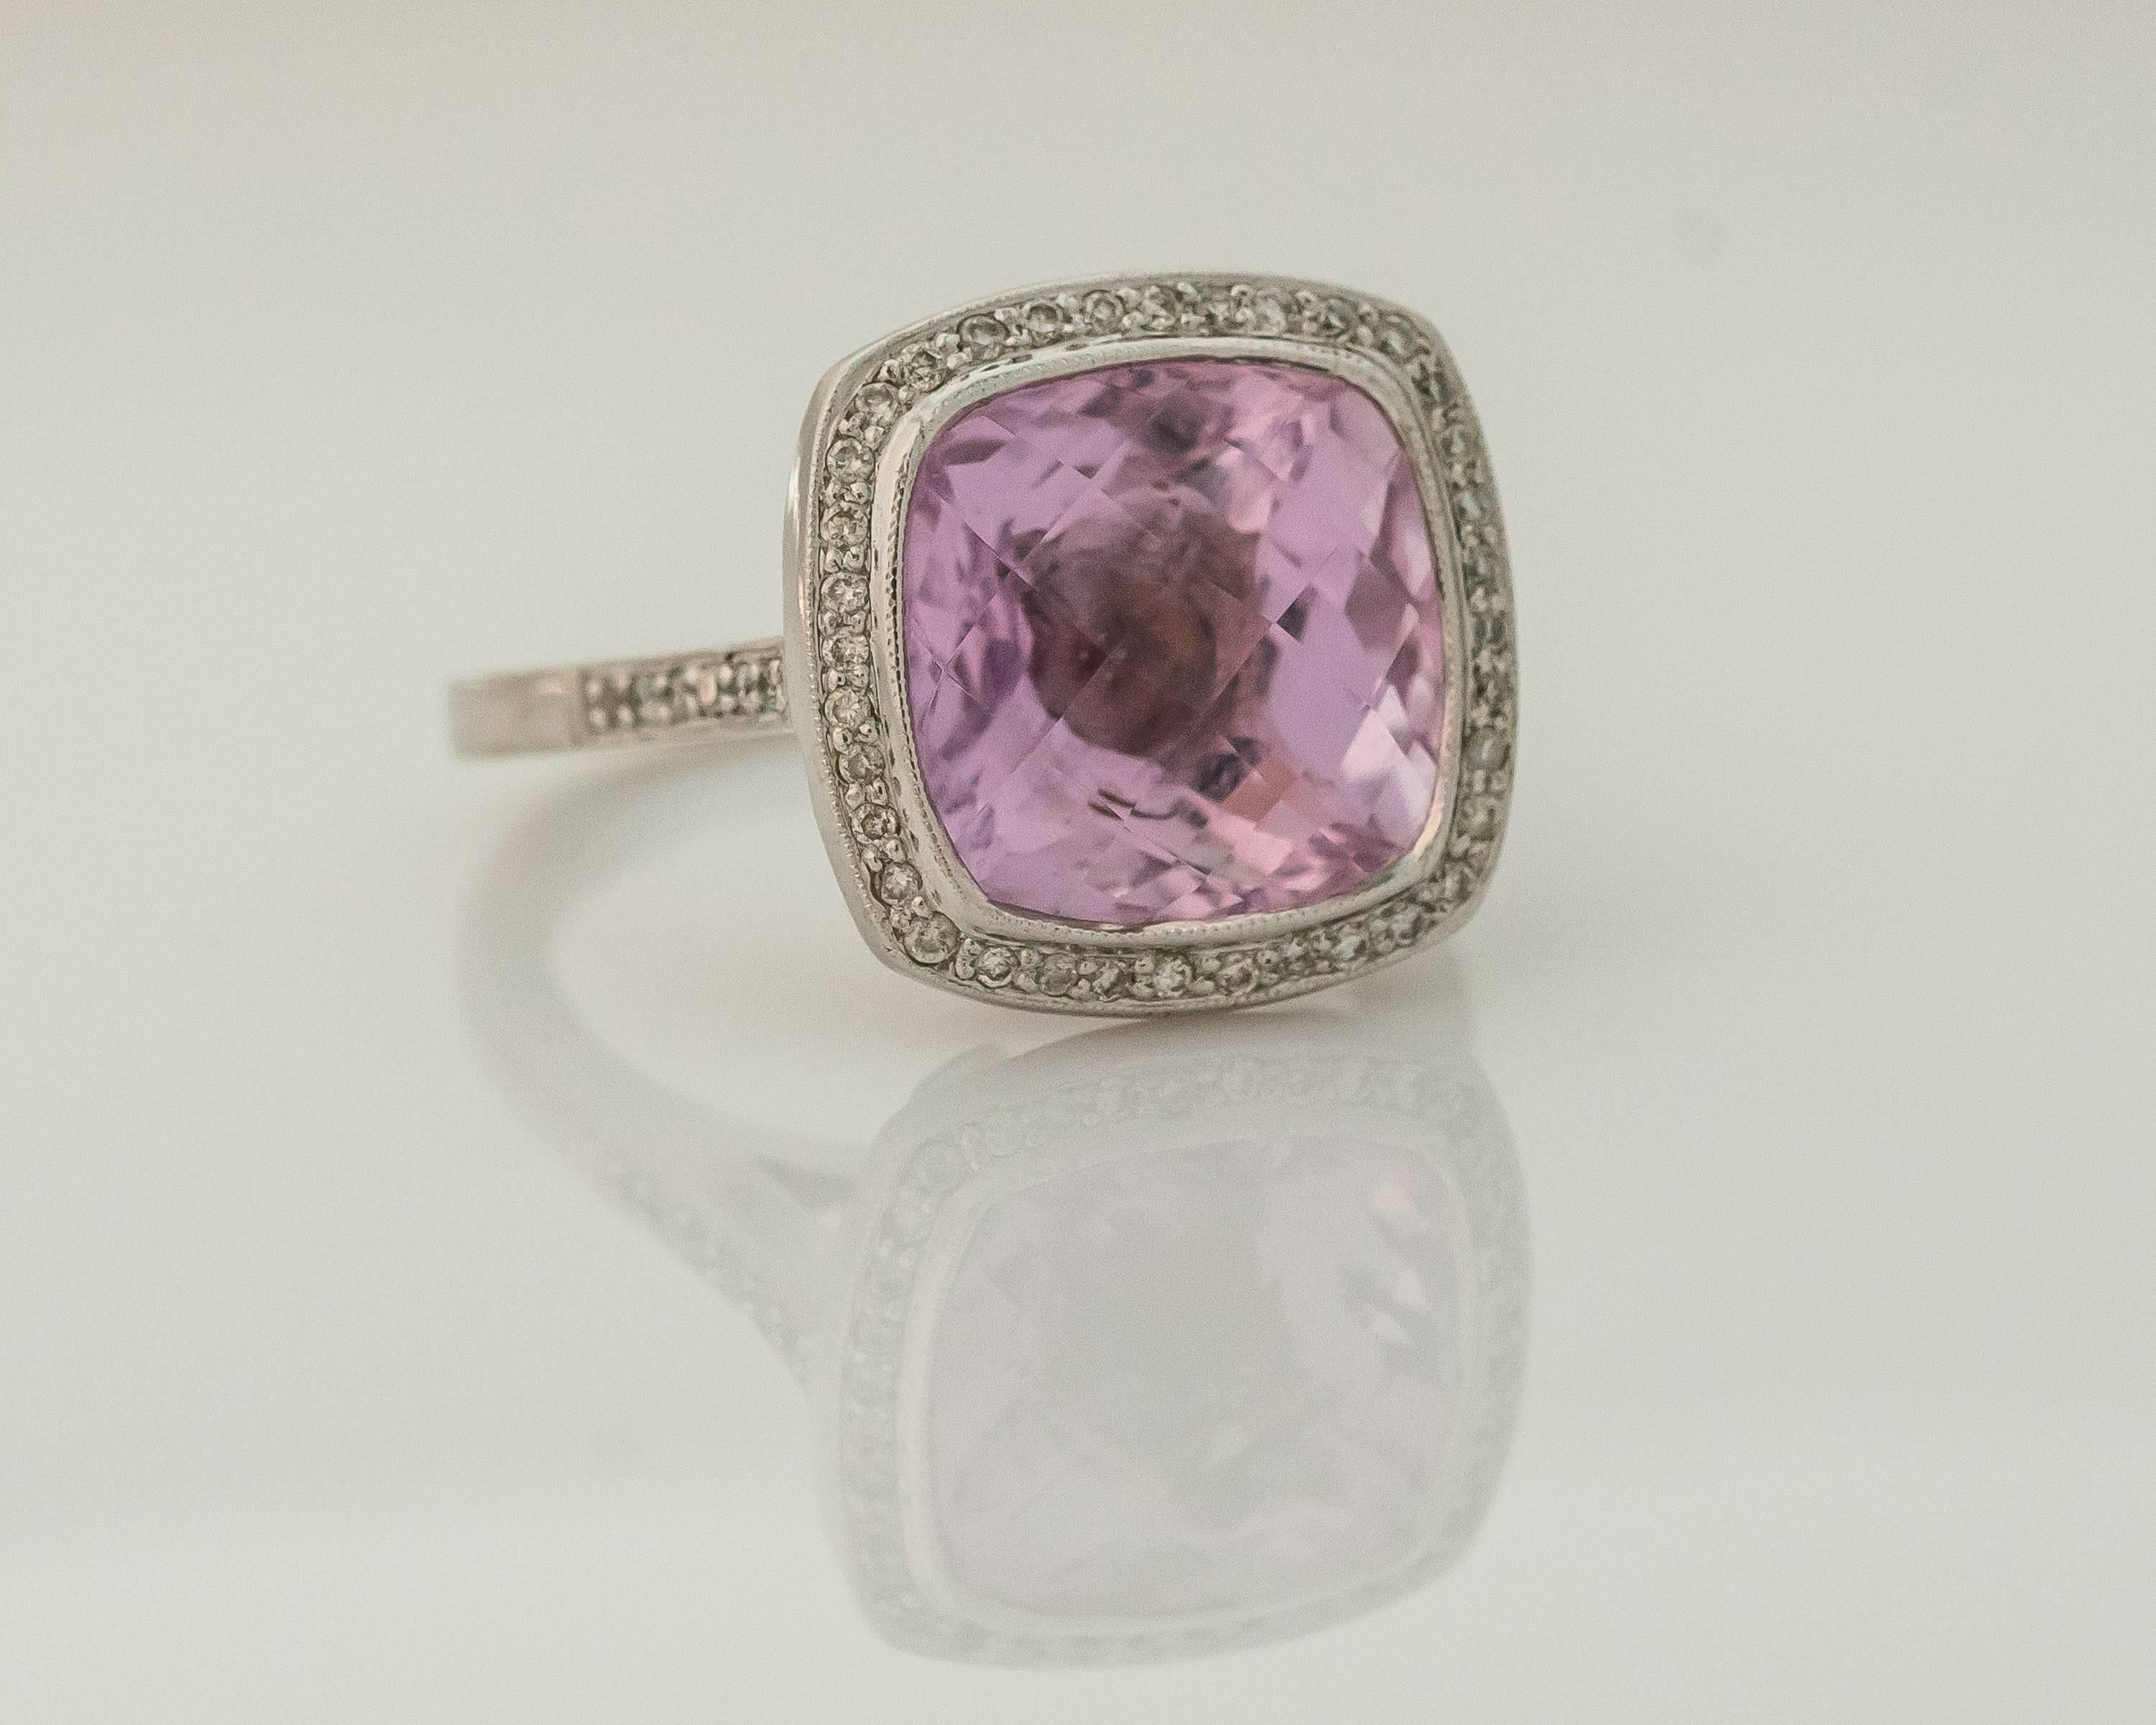 This gorgeous 1990s 4 Carat Square Pink Topaz ring features a Halo of round brilliant Diamonds set in 14 Karat White Gold. The cathedral mount setting has a single row of diamonds on each of the 2 sides of the shank leading up to the halo. There is